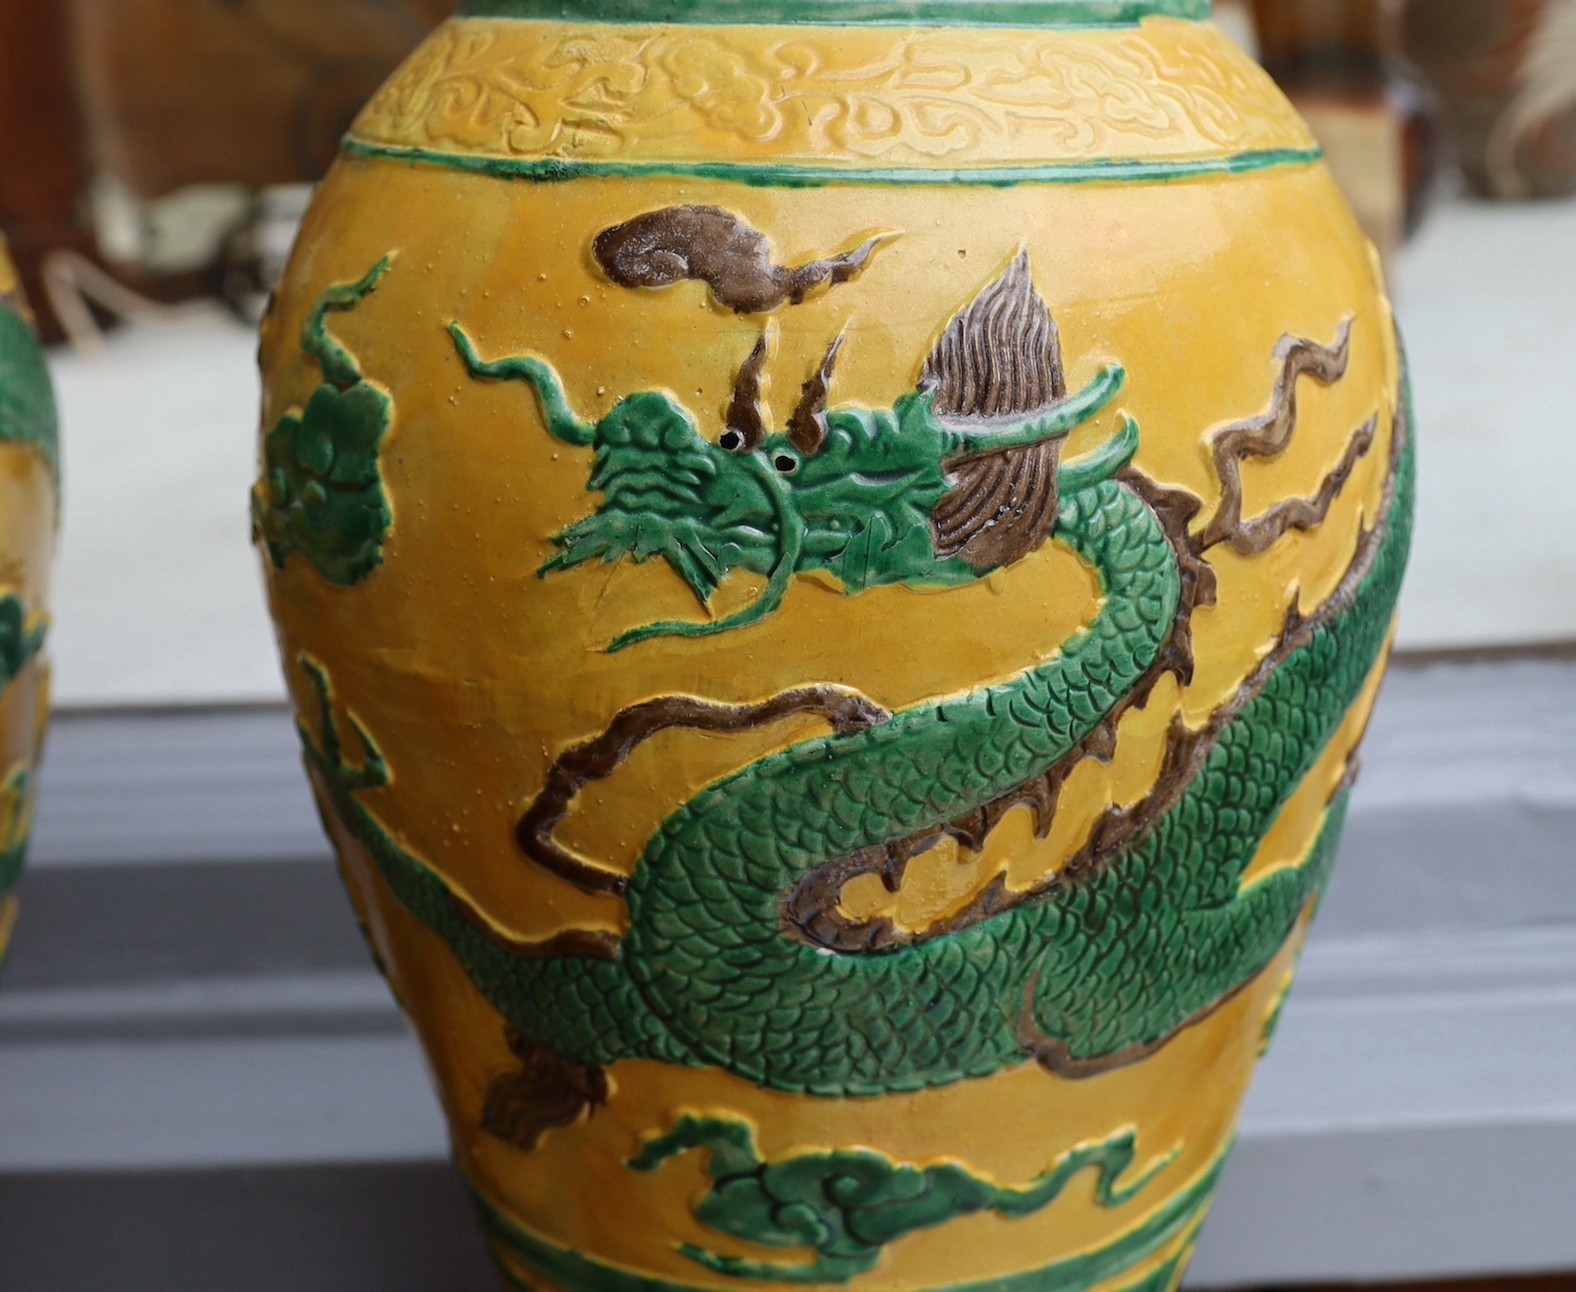 A pair of Chinese yellow glazed baluster vases decorated with bands of flowers and dragons, on hardwood stands, height 67cm. height overall 85cm